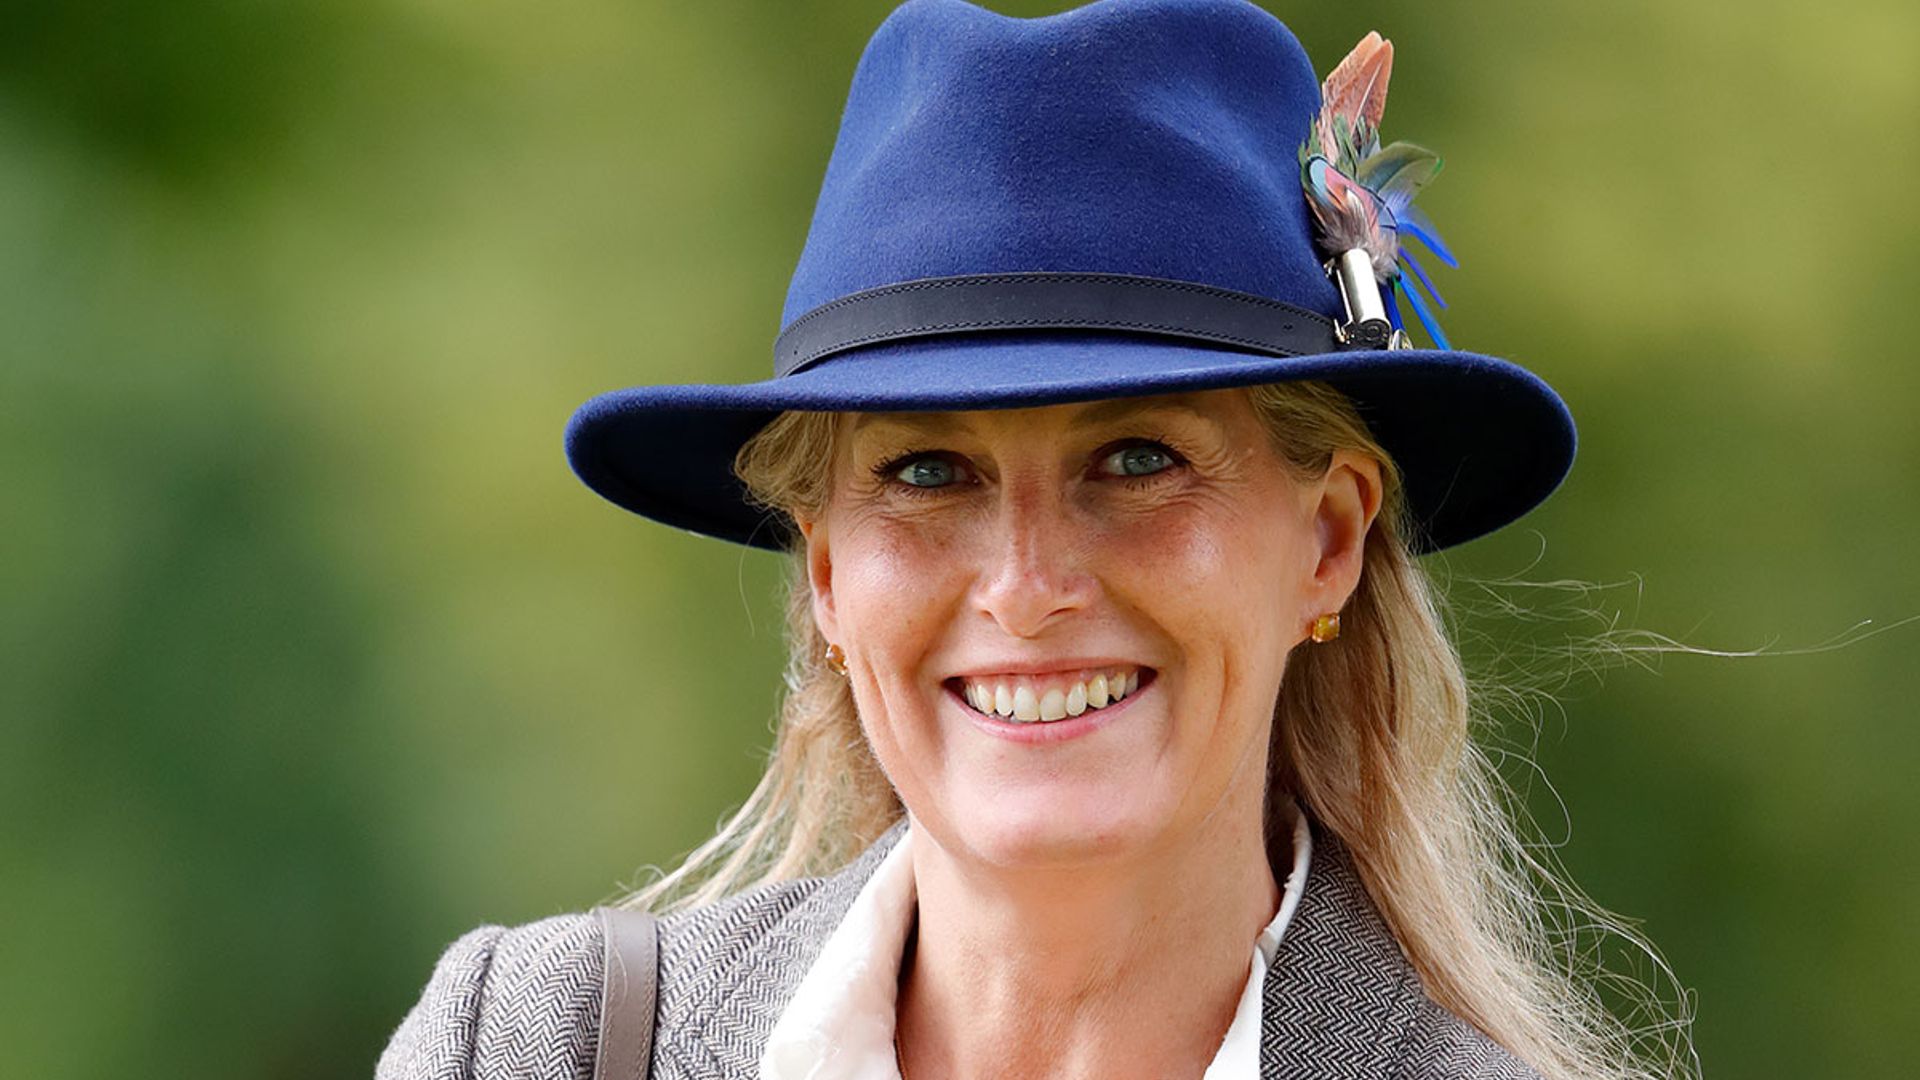 The Countess of Wessex hailed as 'inspiring' by students for touching reason